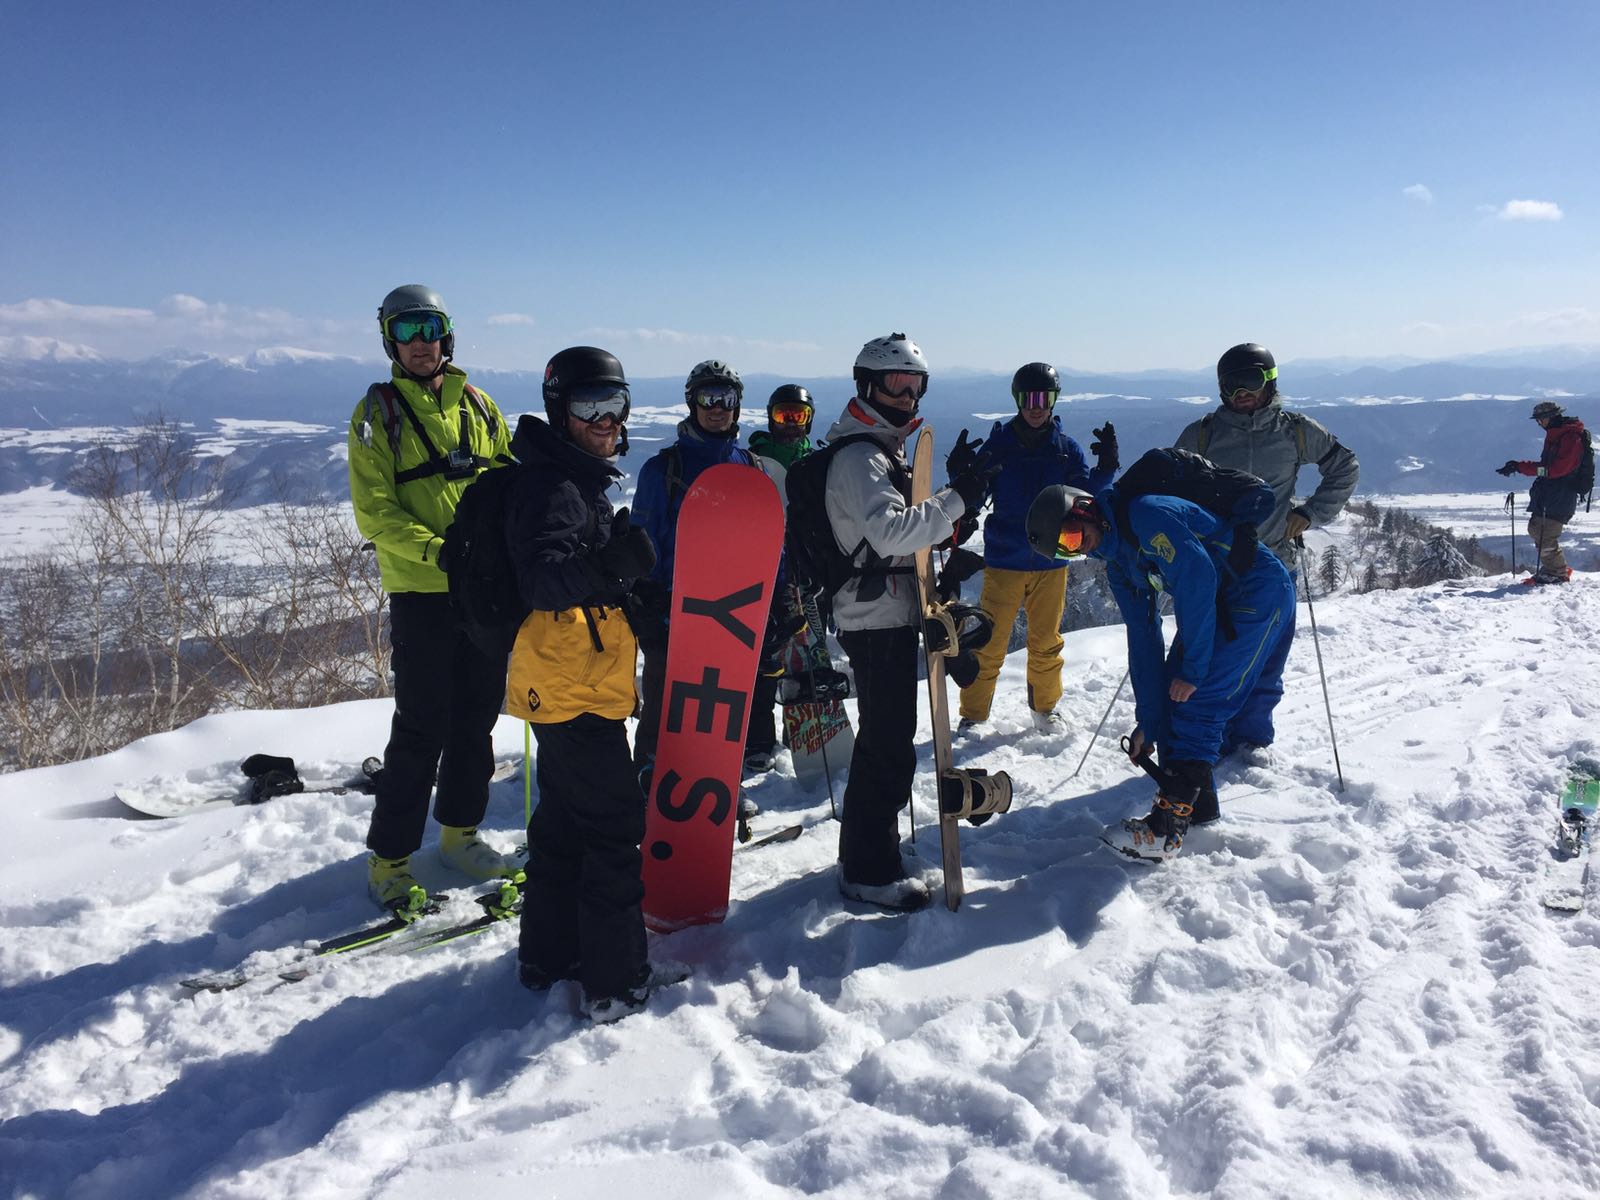 The Group @ Furano